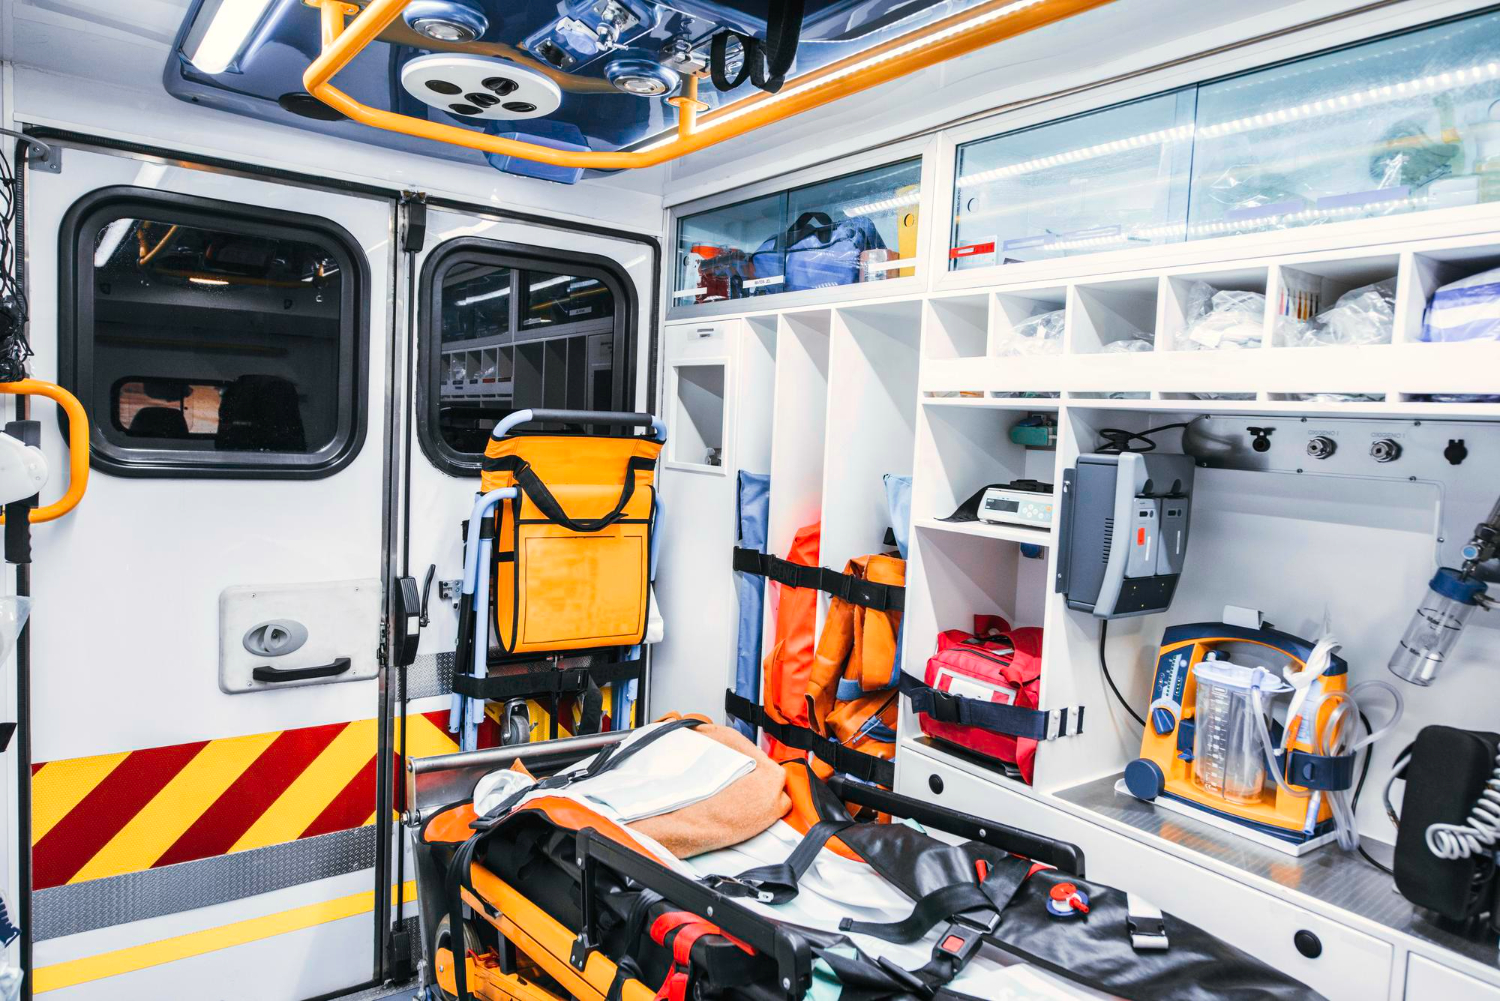 The interior of an ambulance, fully stocked with medical supplies and equipment after a complete EMS rig check.